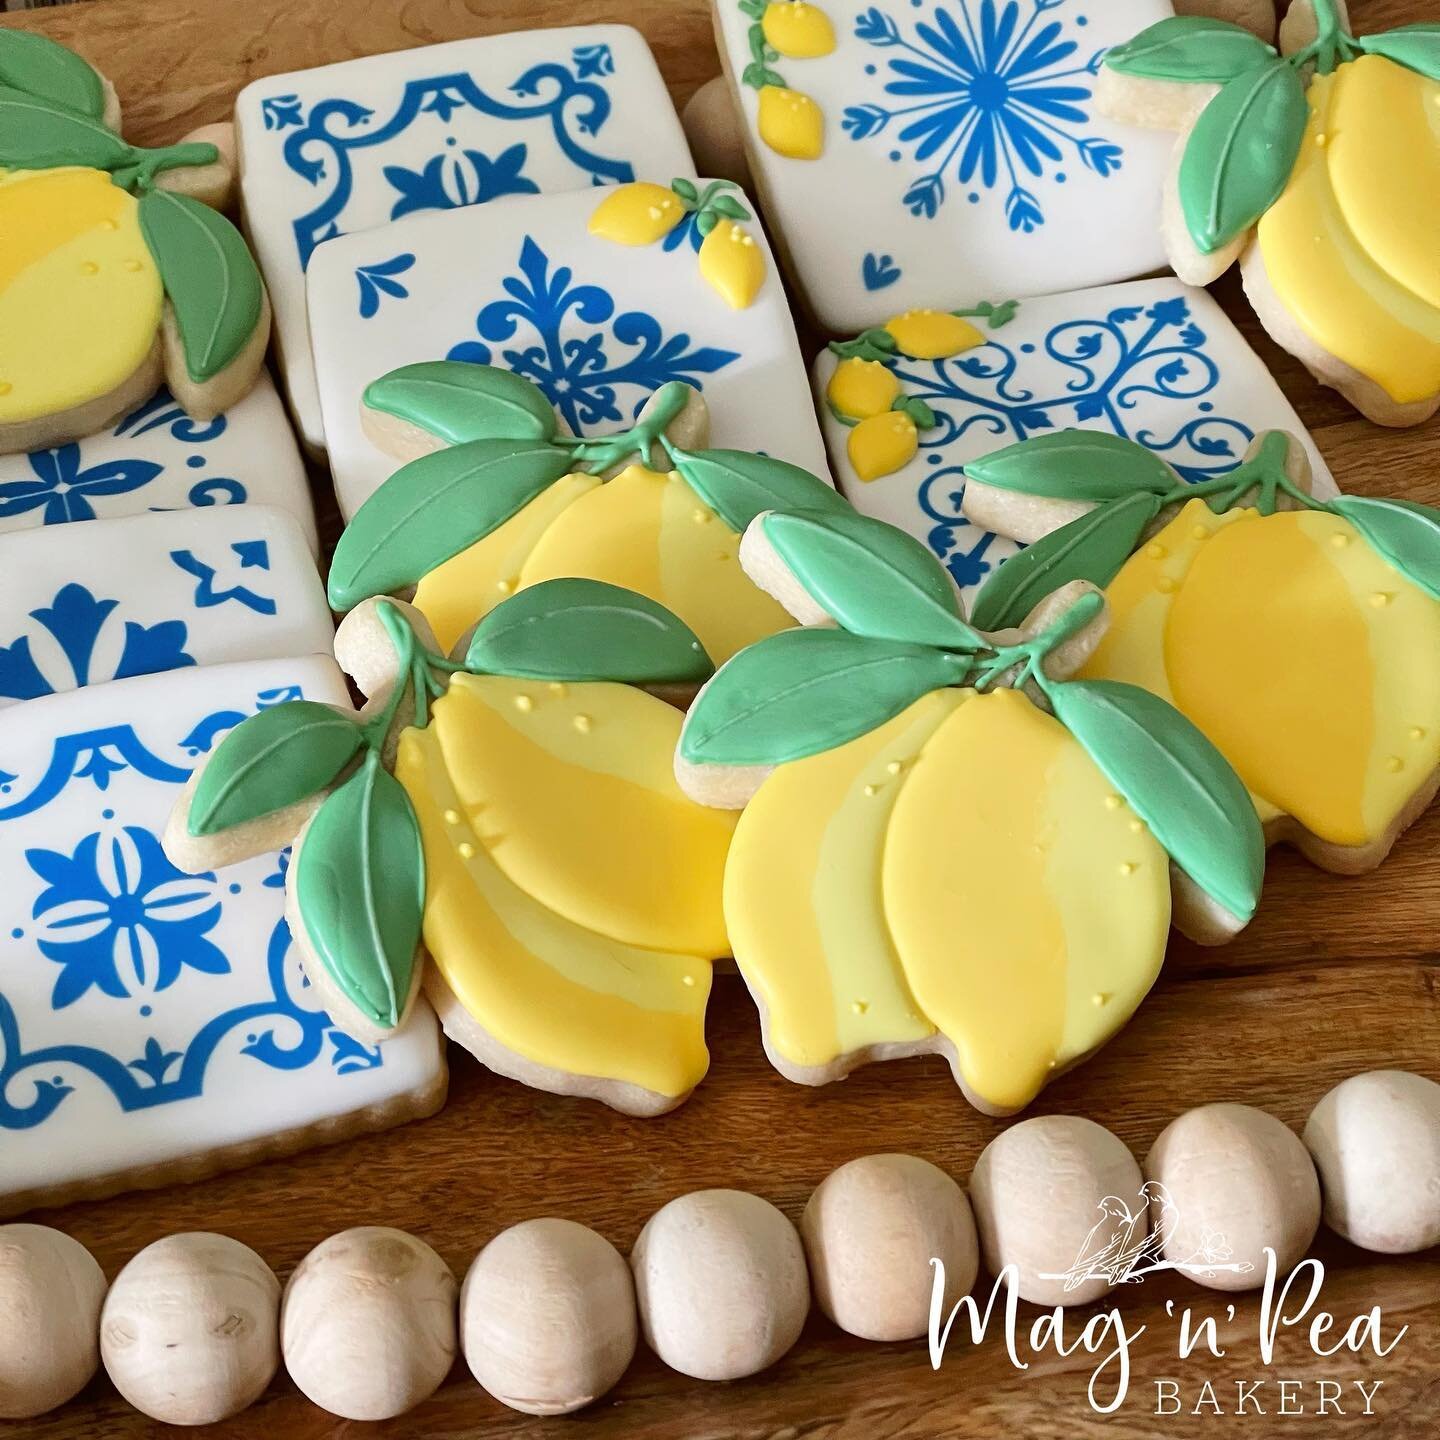 This is one of my favorite sets in some time. It reminds me of Sorrento and the narrow cobblestone streets lined with tiny colorful stores and filled with the most beautiful ceramics and fragrant lemon everything.

Lemon bunch cutter was designed and